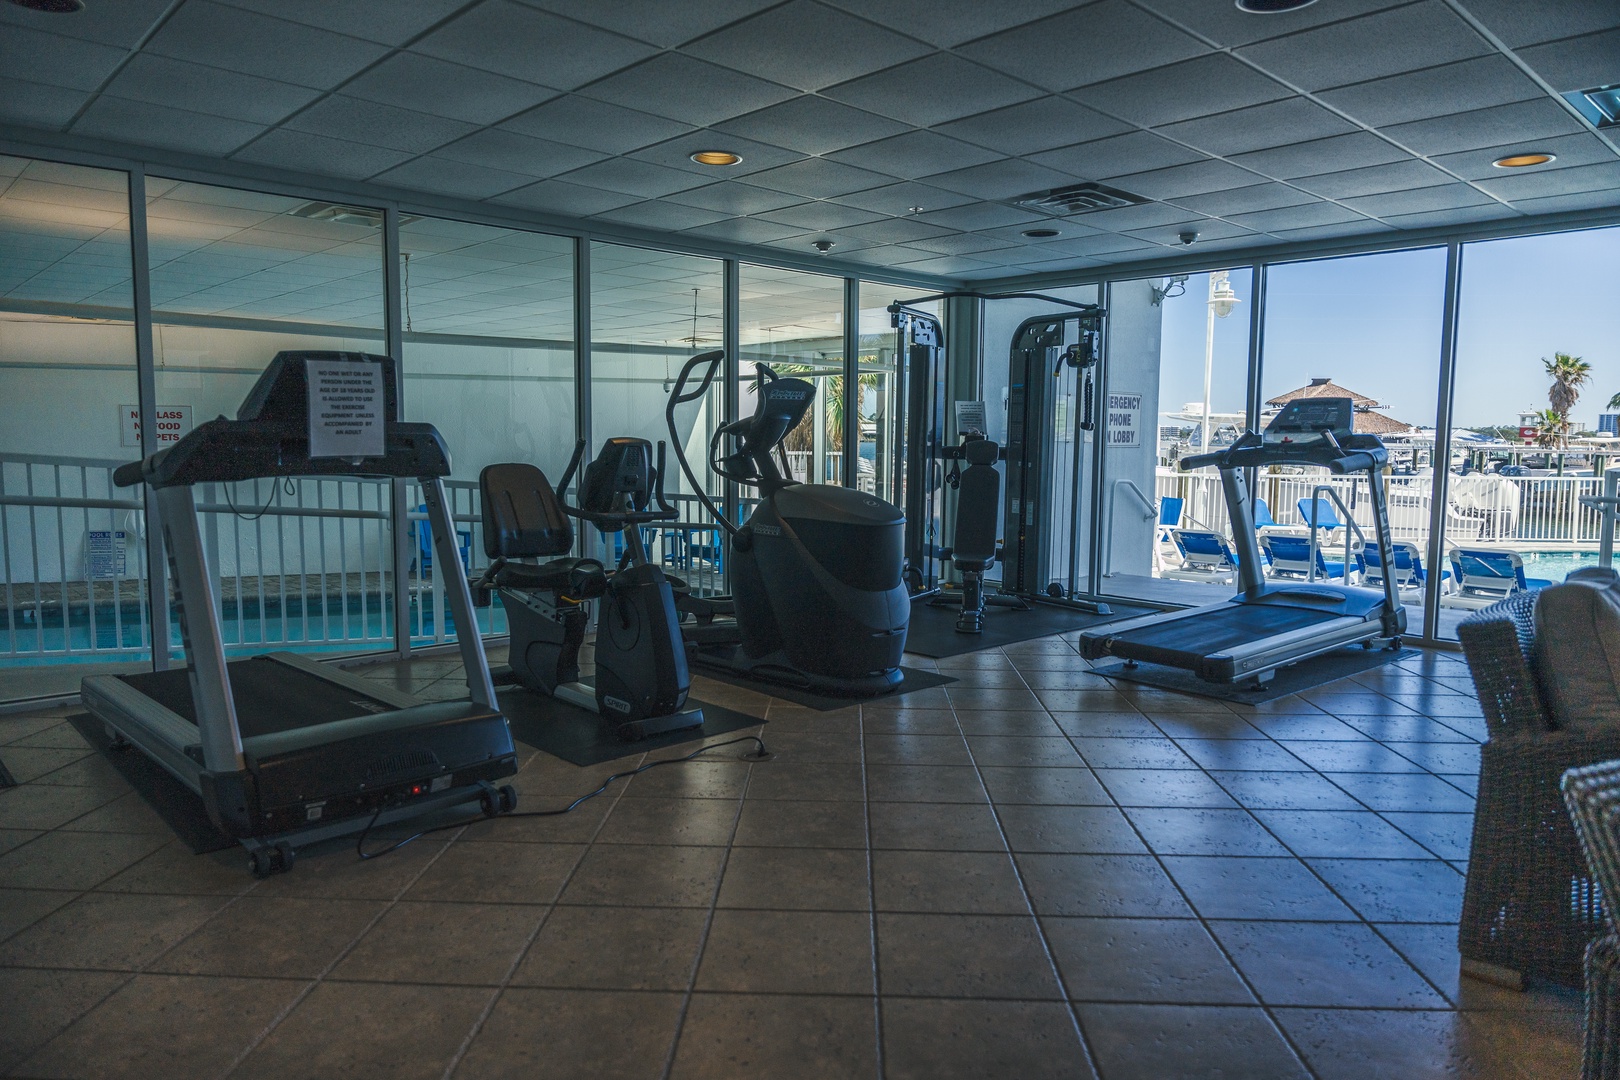 You don't have to leave your workouts at home! Get your blood pumping in the fitness center!